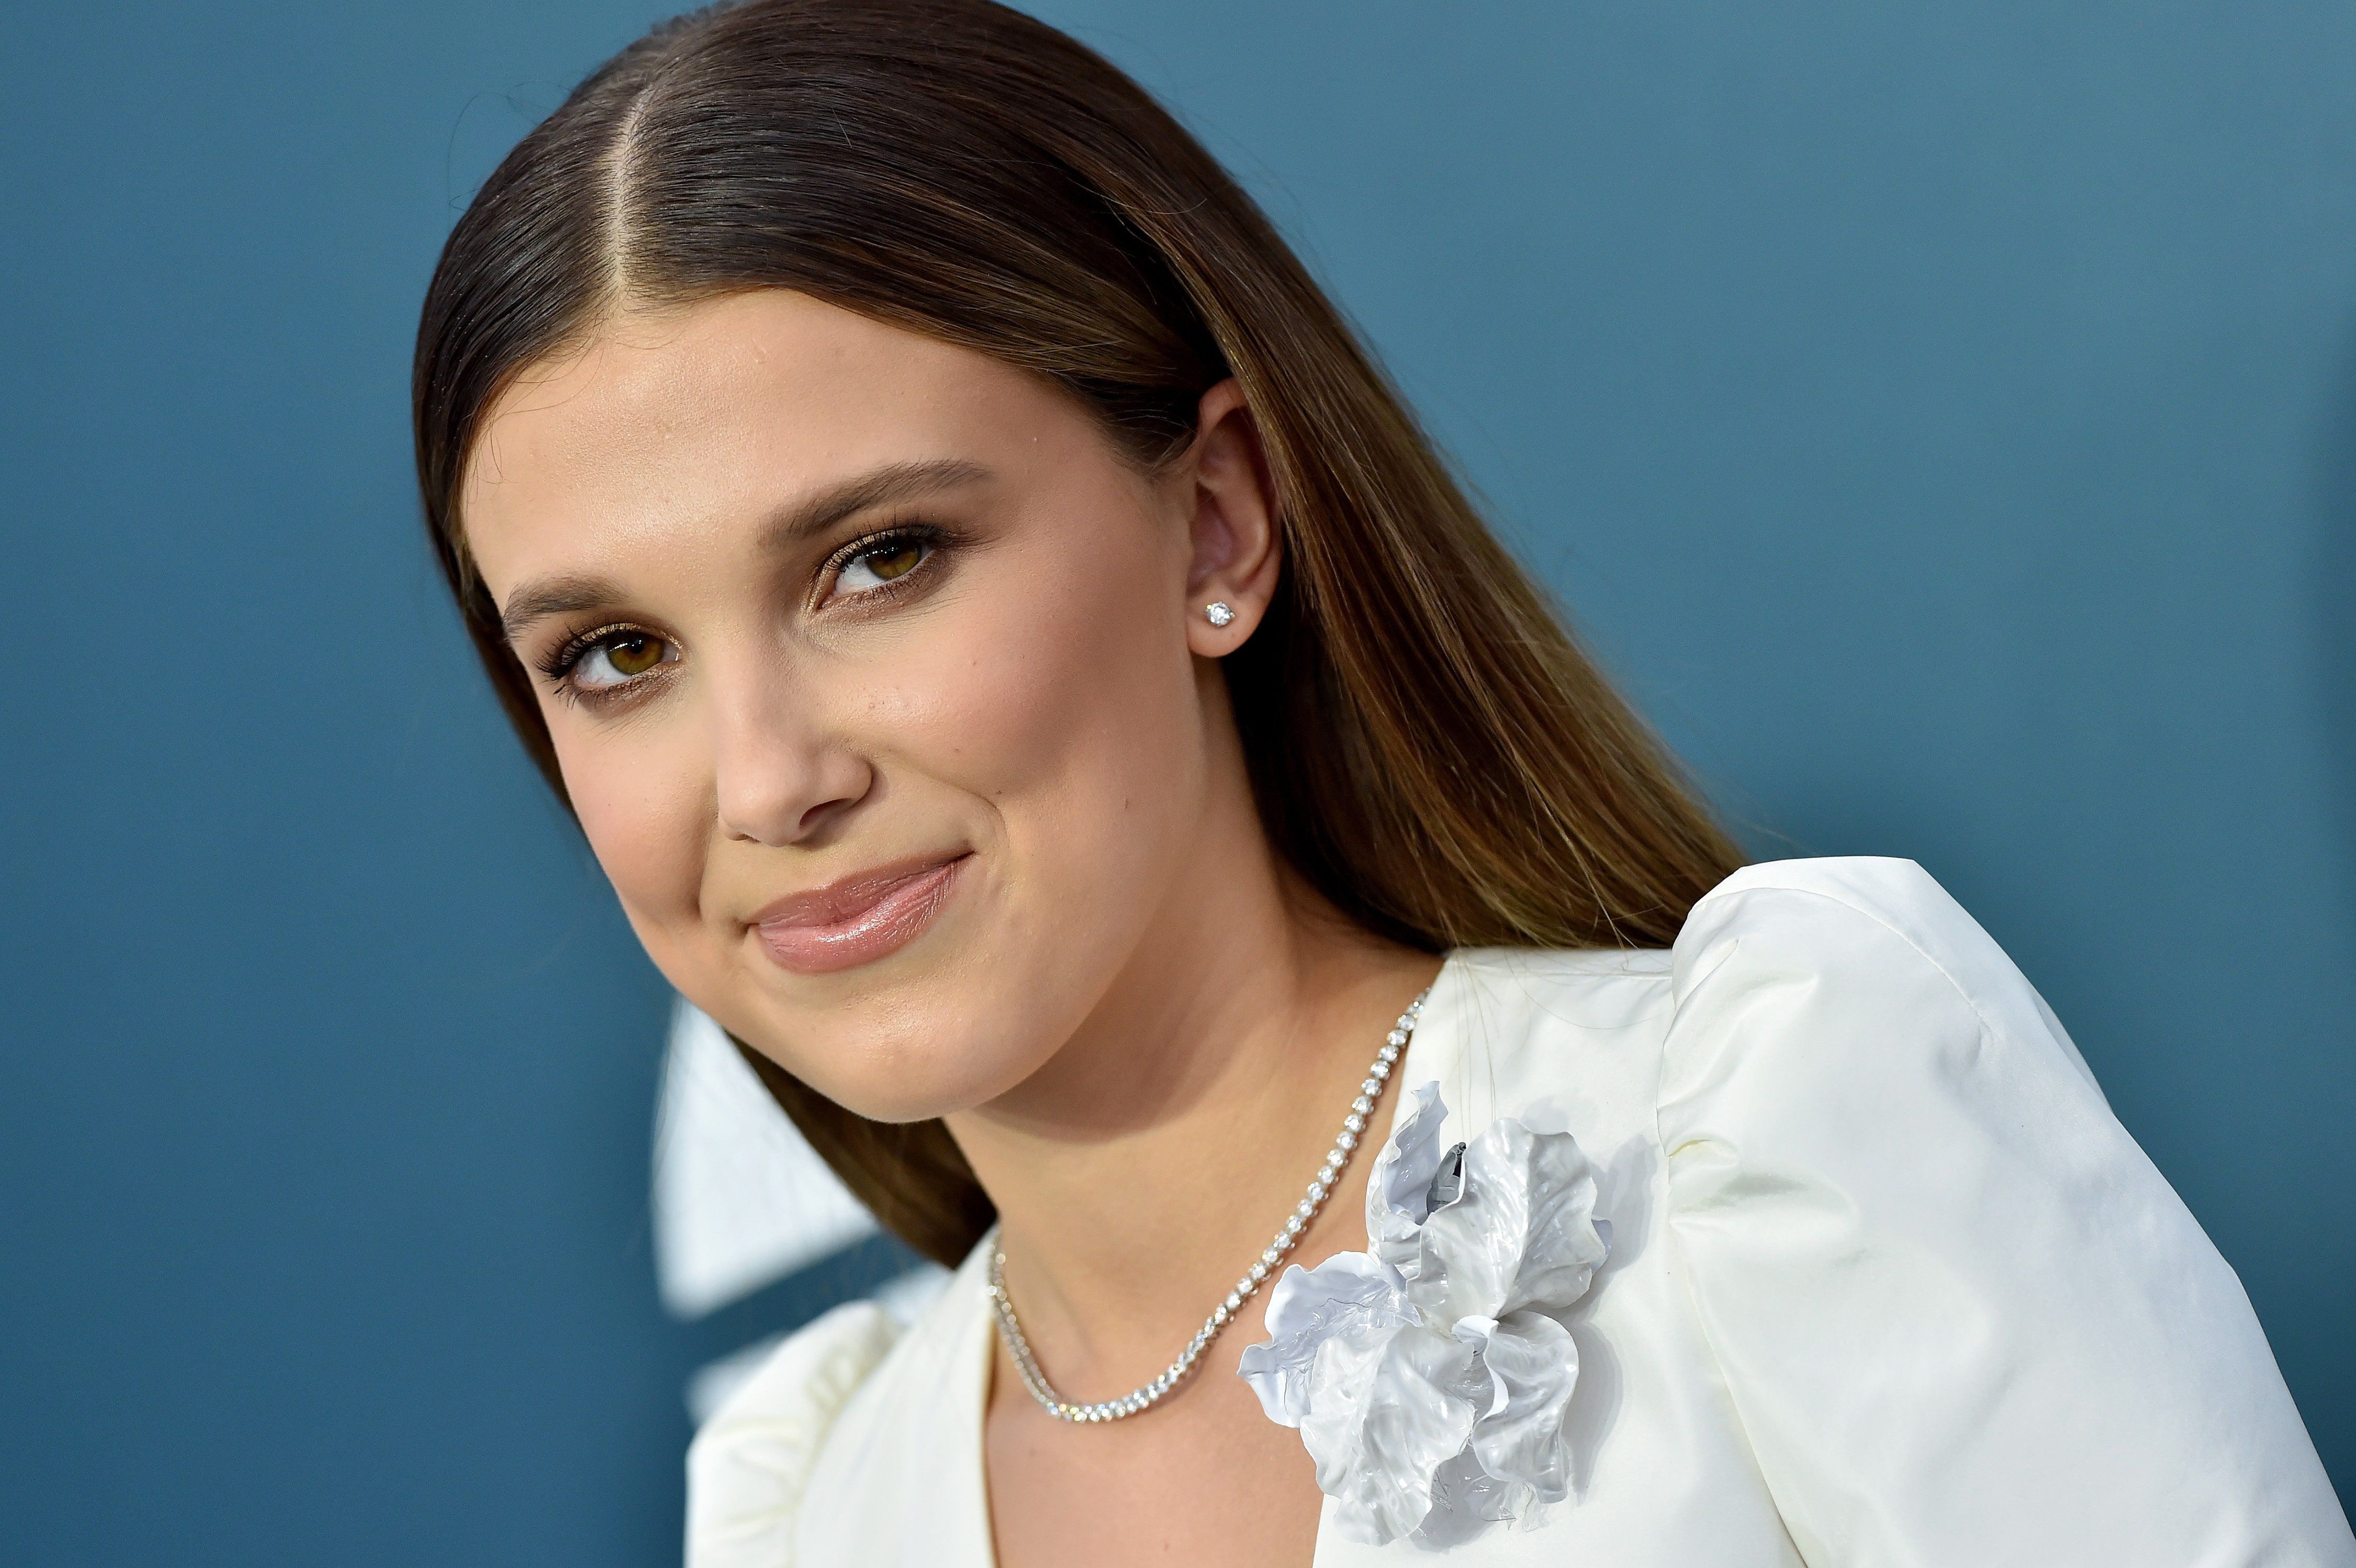 Millie Bobby Brown Said She Gets Frustrated By Online Harassment